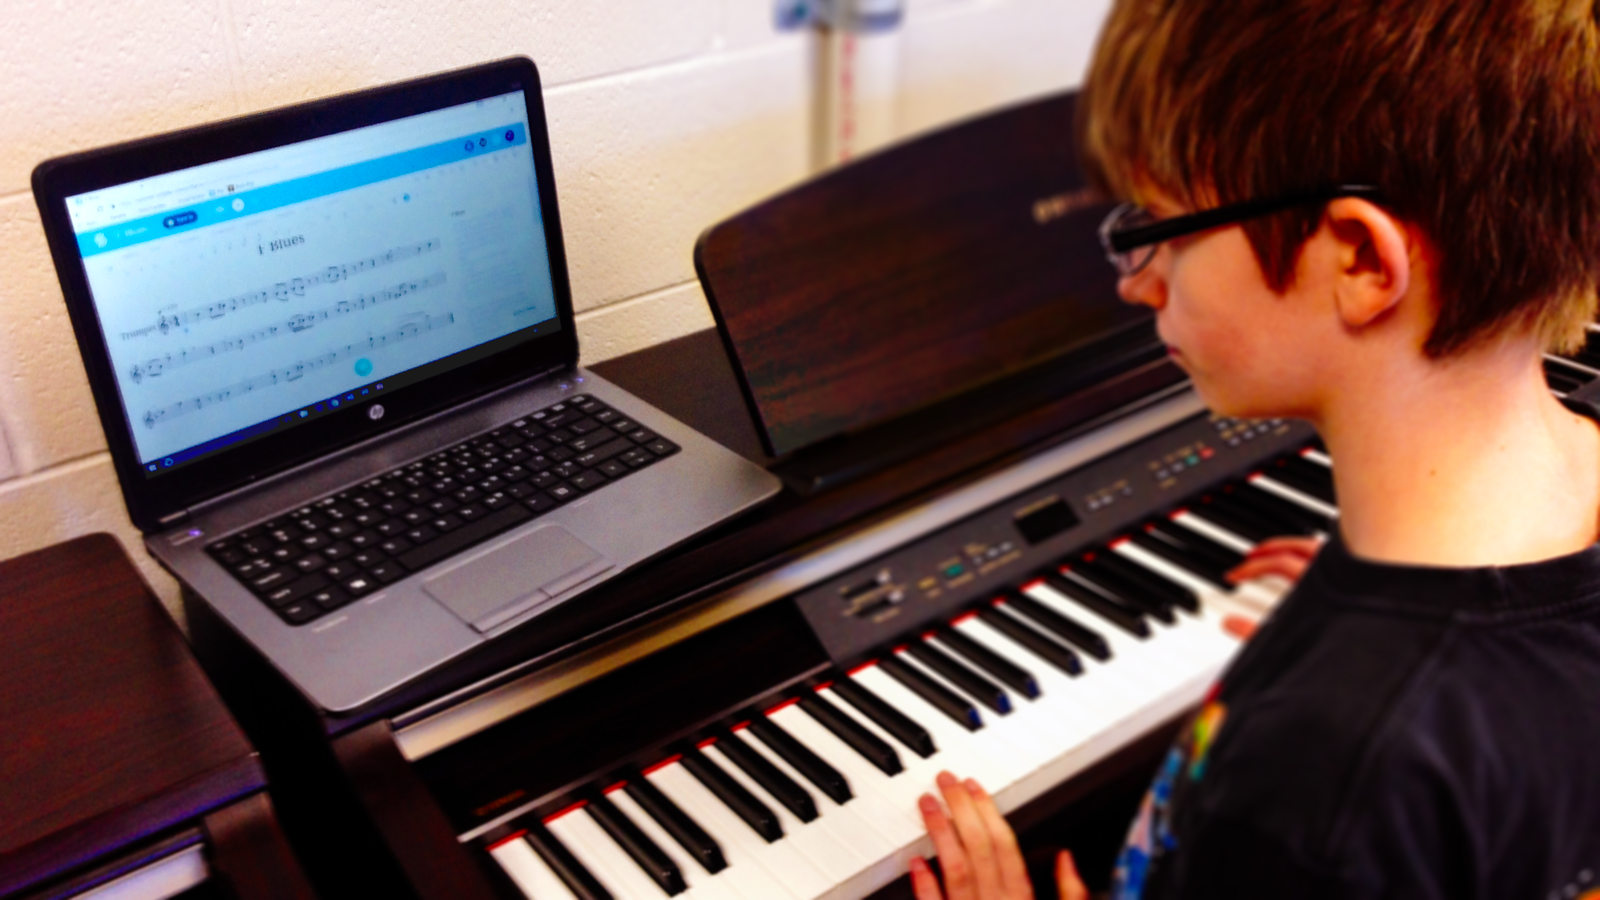 From collaboration between students to music composition